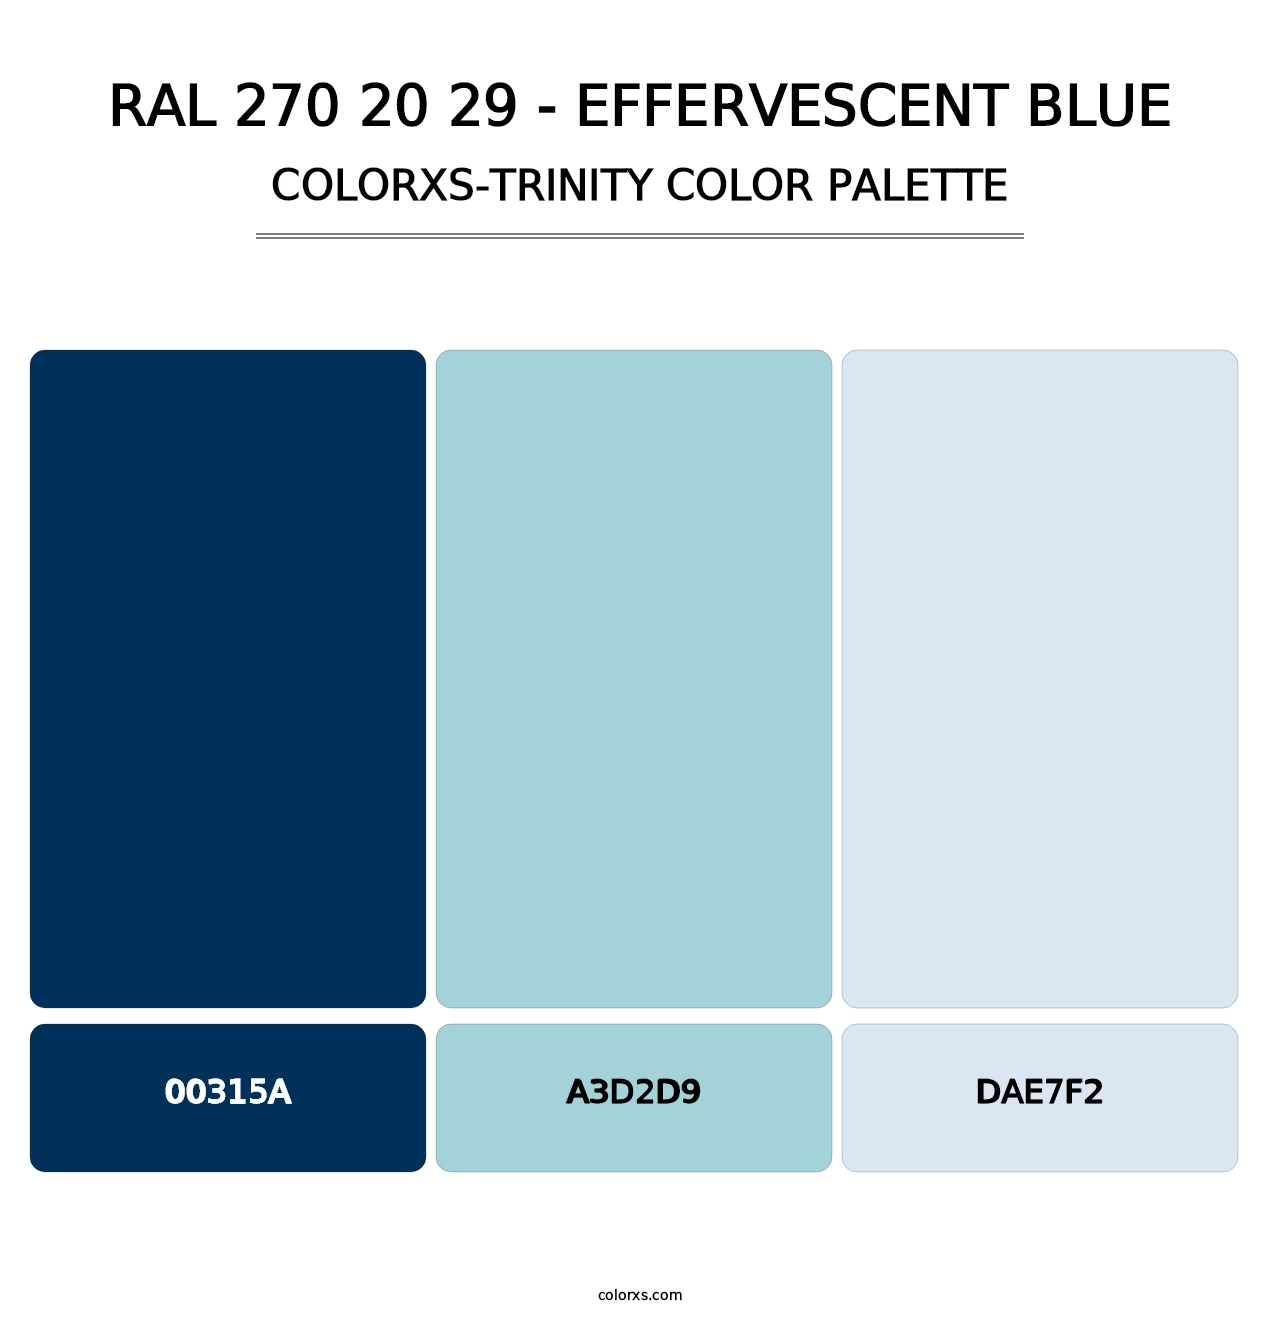 RAL 270 20 29 - Effervescent Blue - Colorxs Trinity Palette